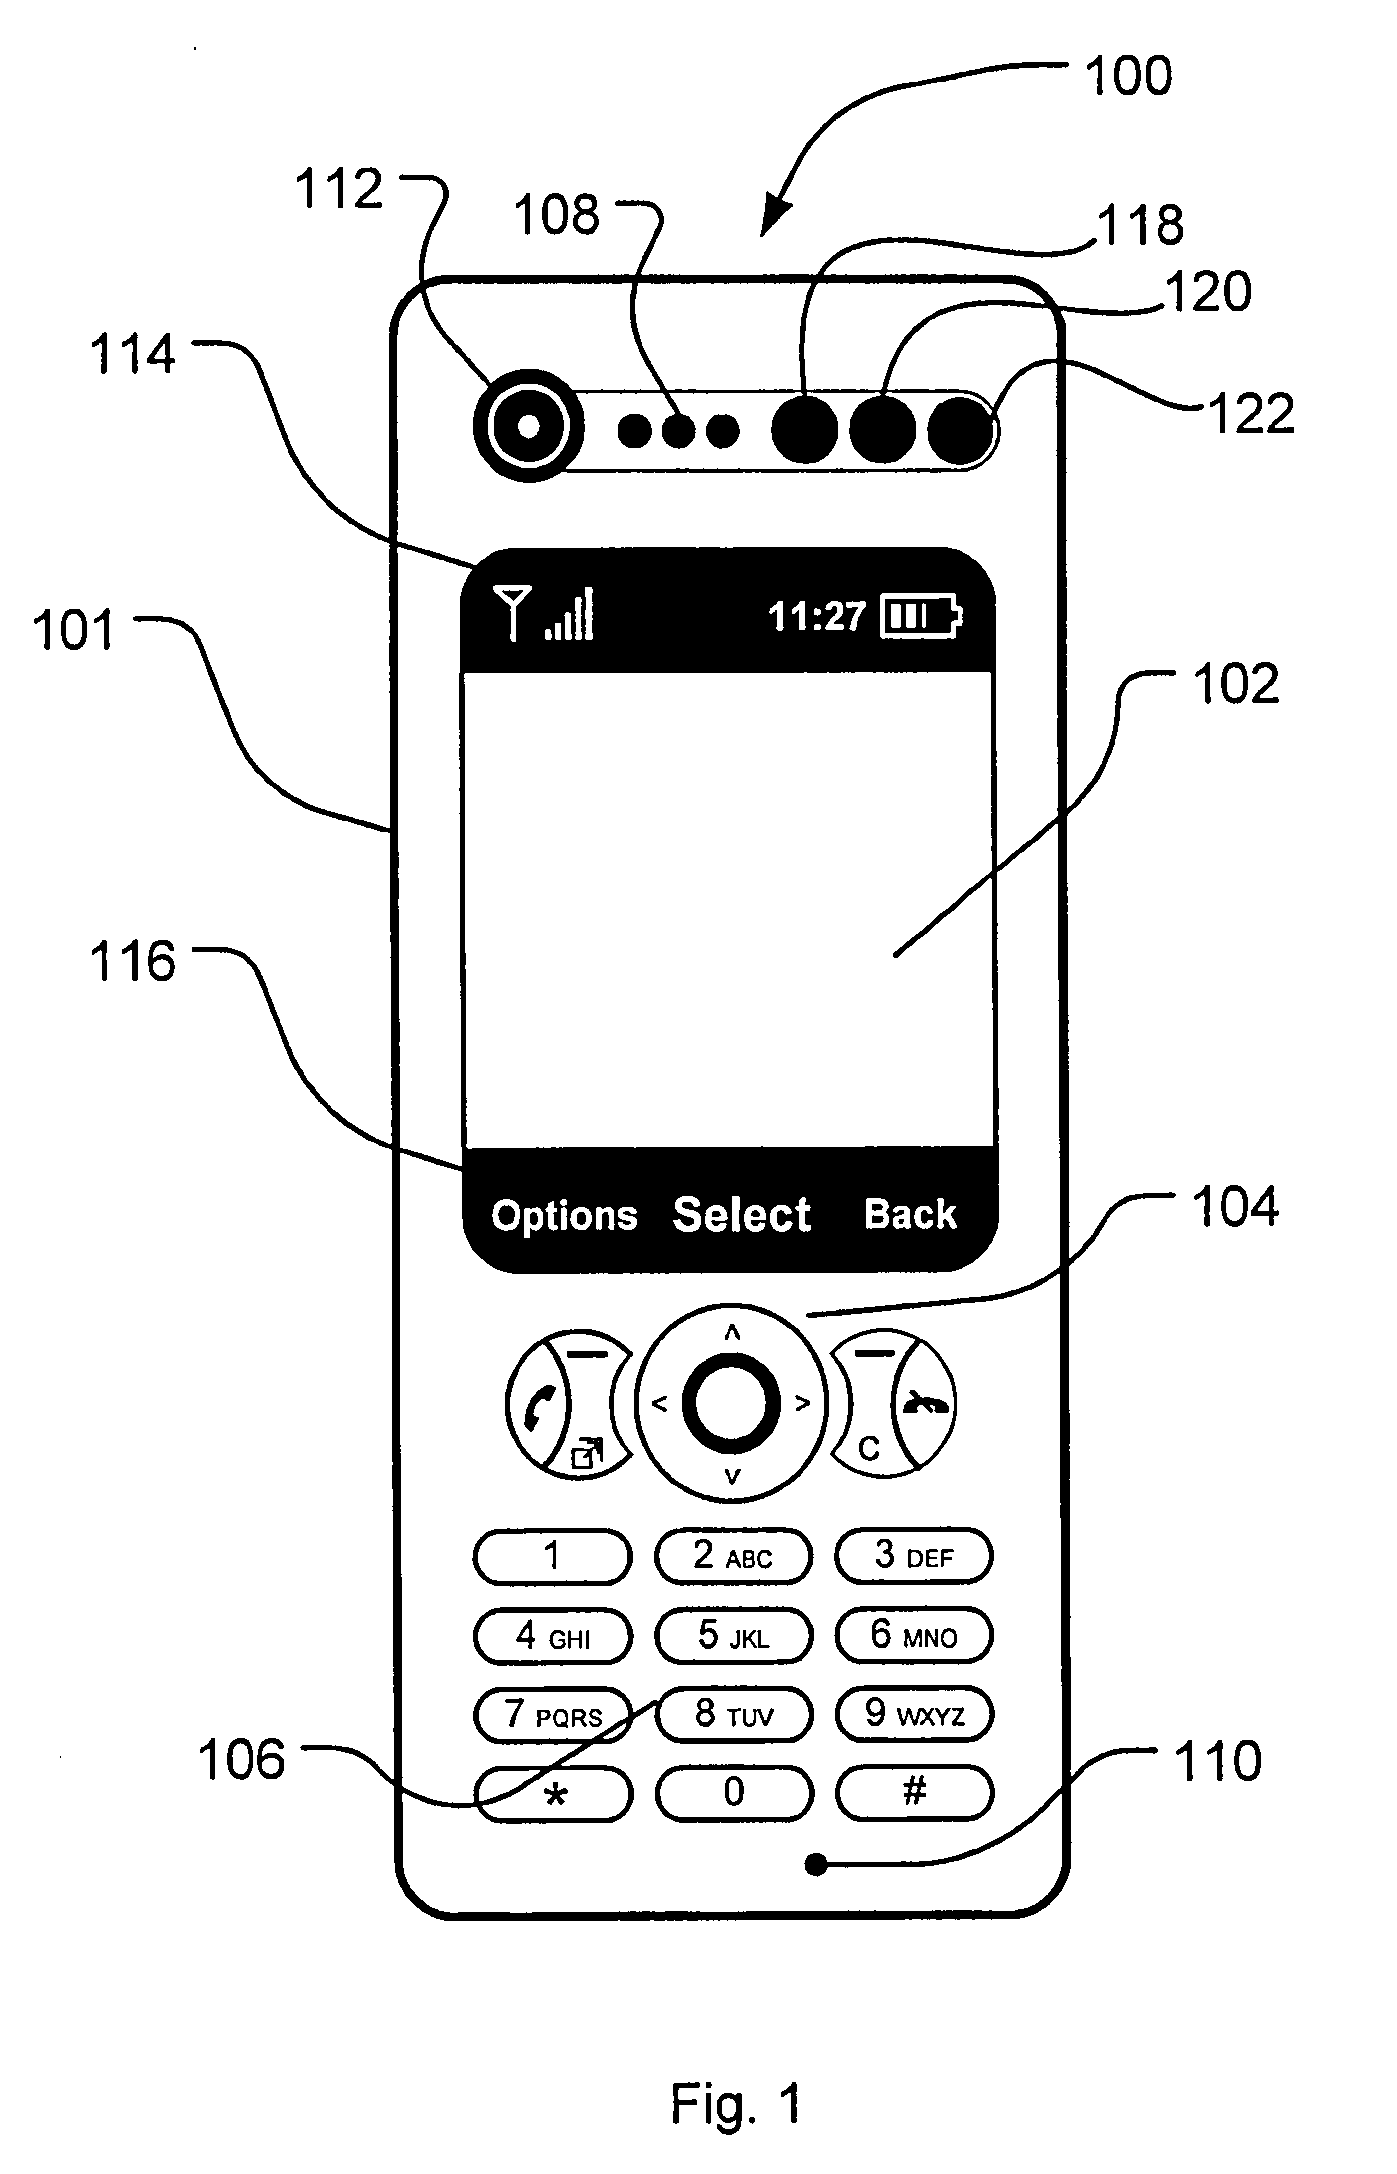 User-modifiable casing for portable communication devices